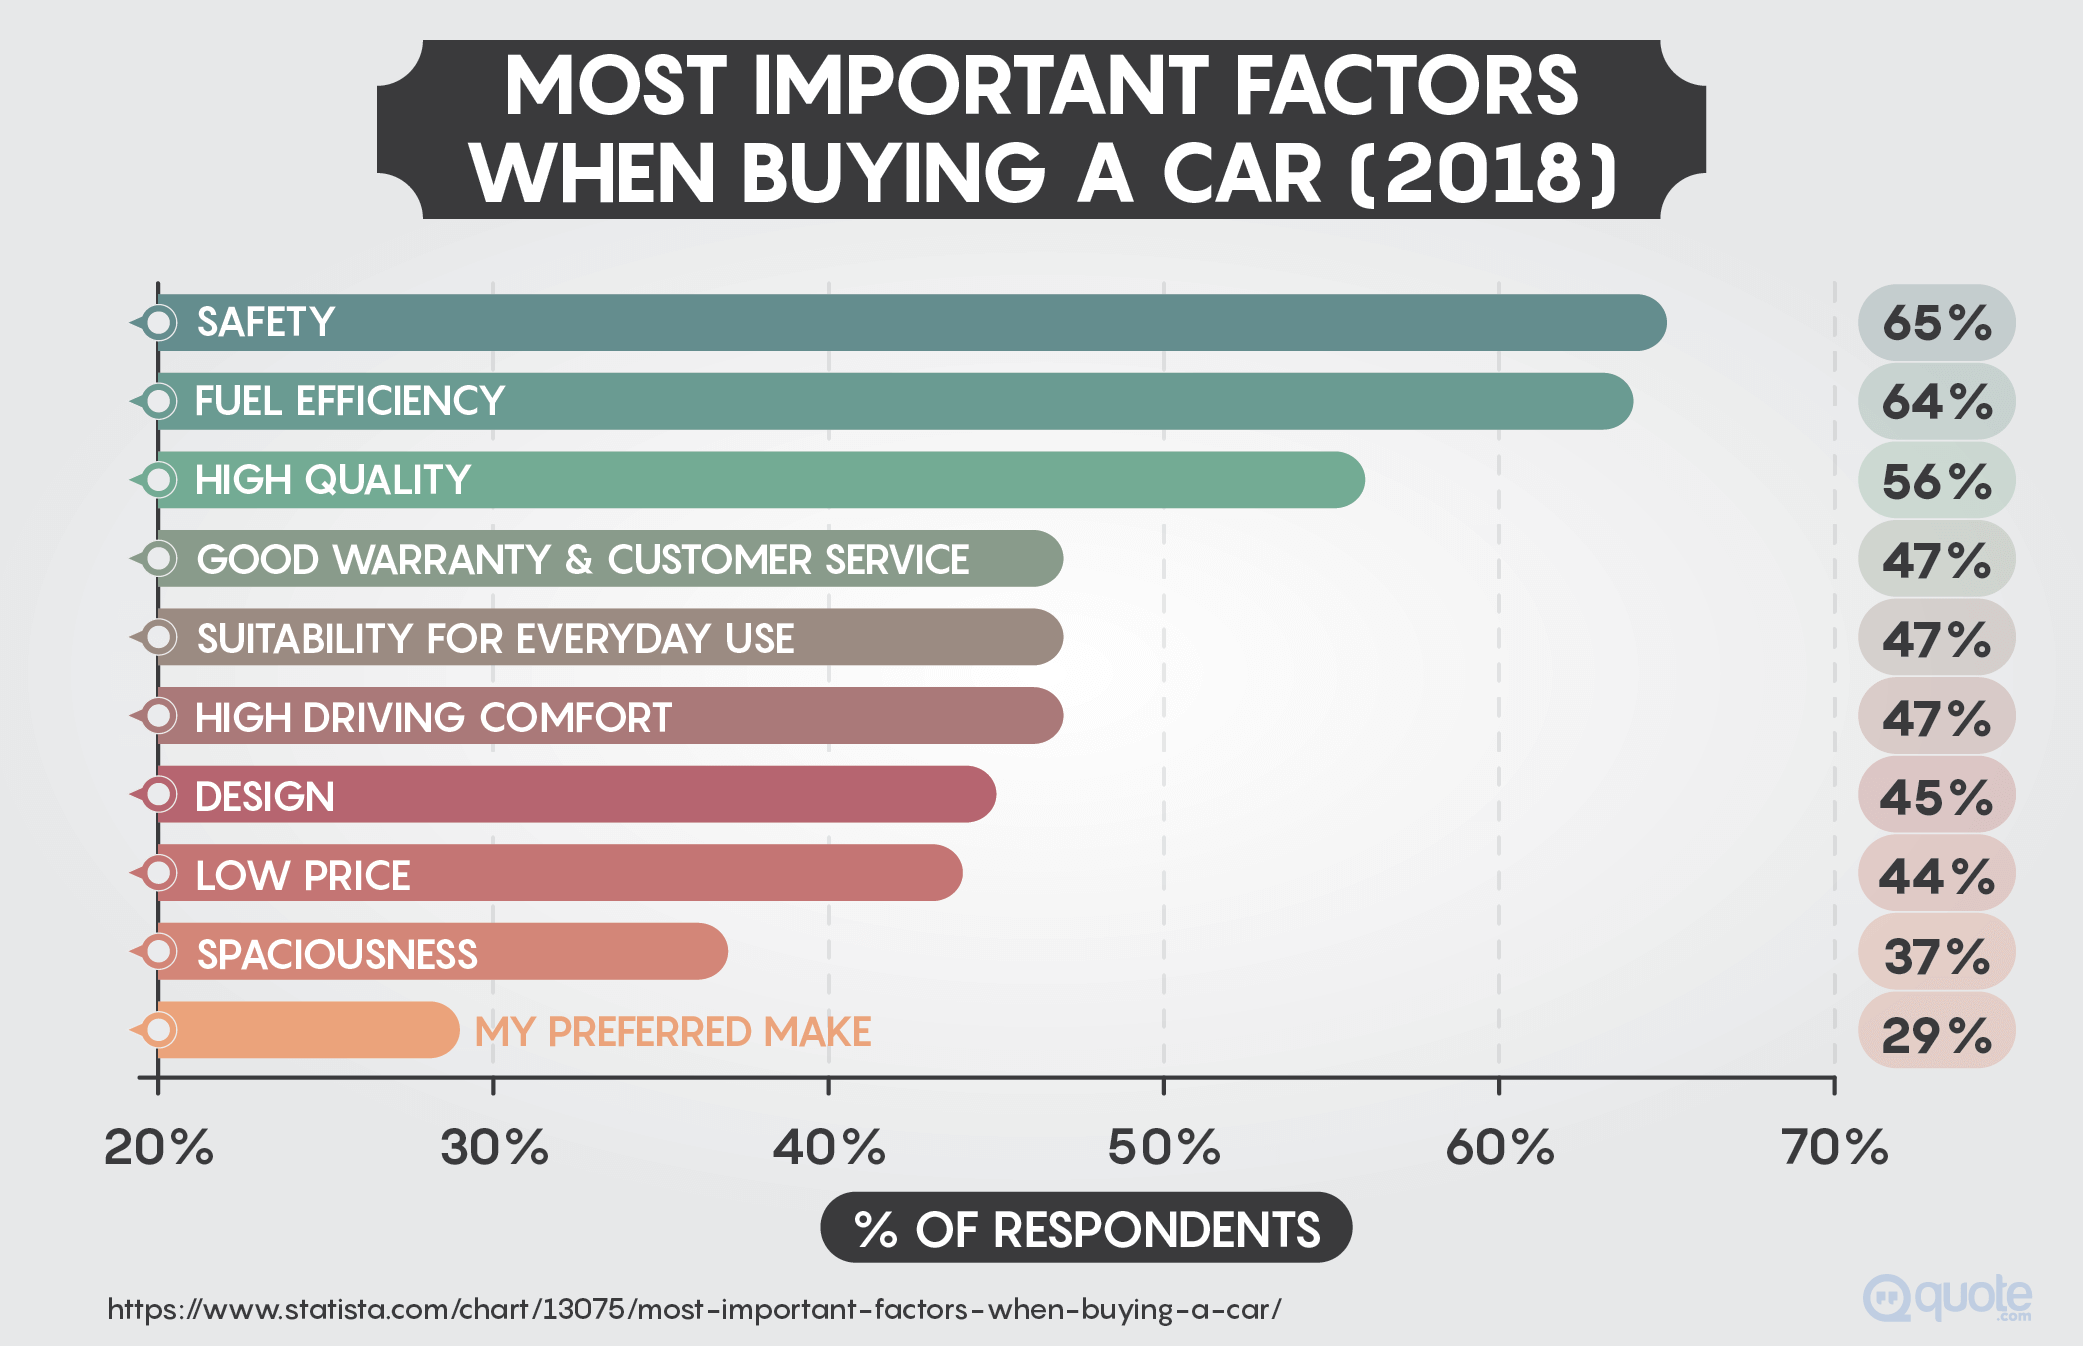 2018 Most Important Factors When Buying a Car